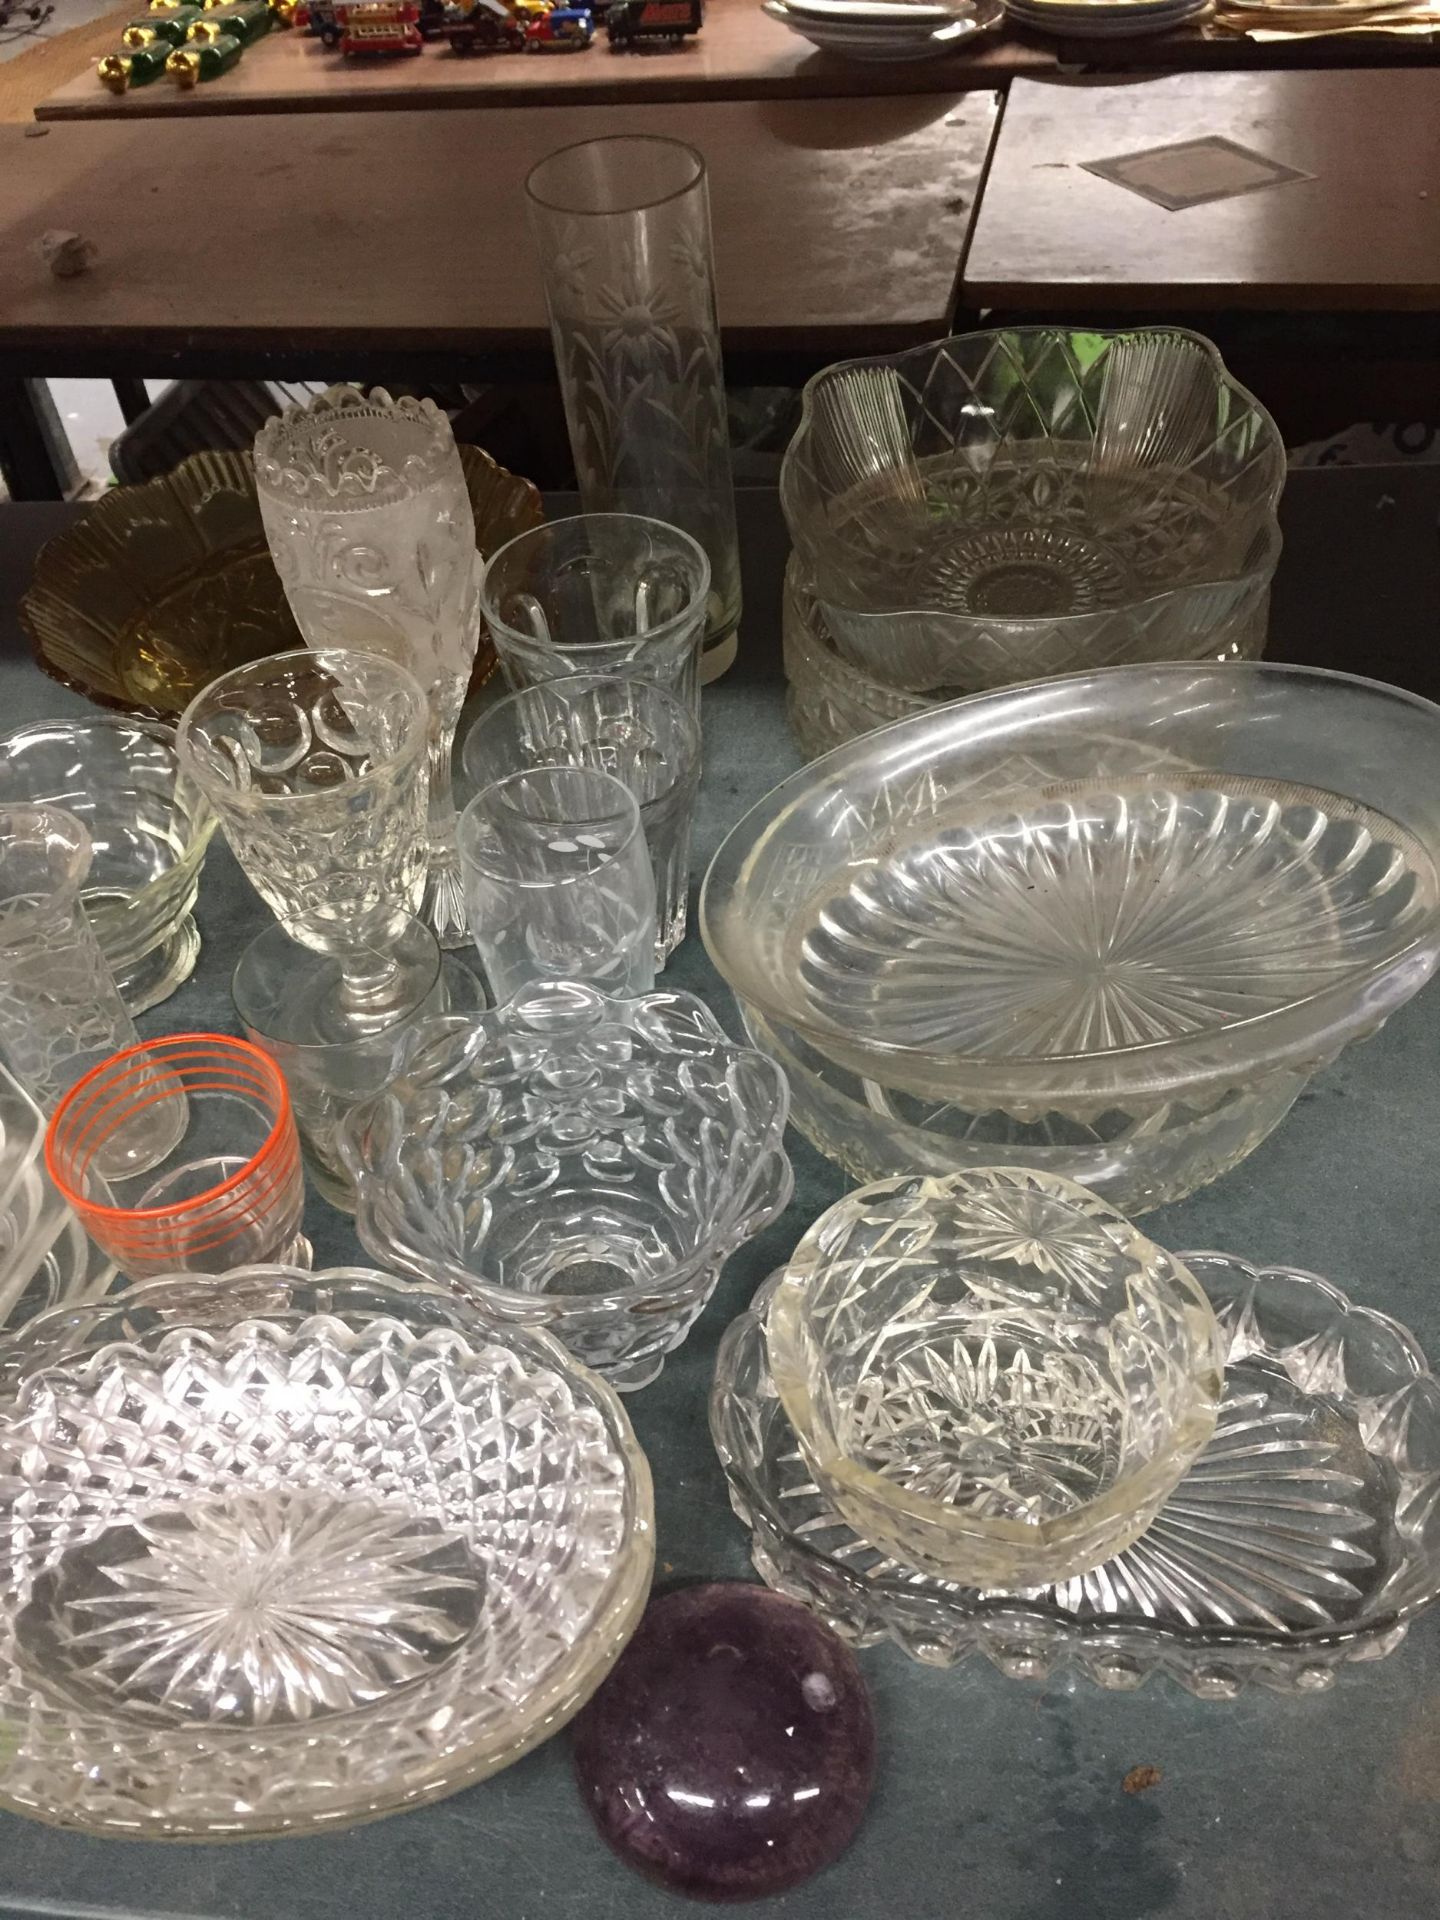 A MIXED LOT OF VINTAGE GLASSWARE, DISHES ETC - Image 3 of 3